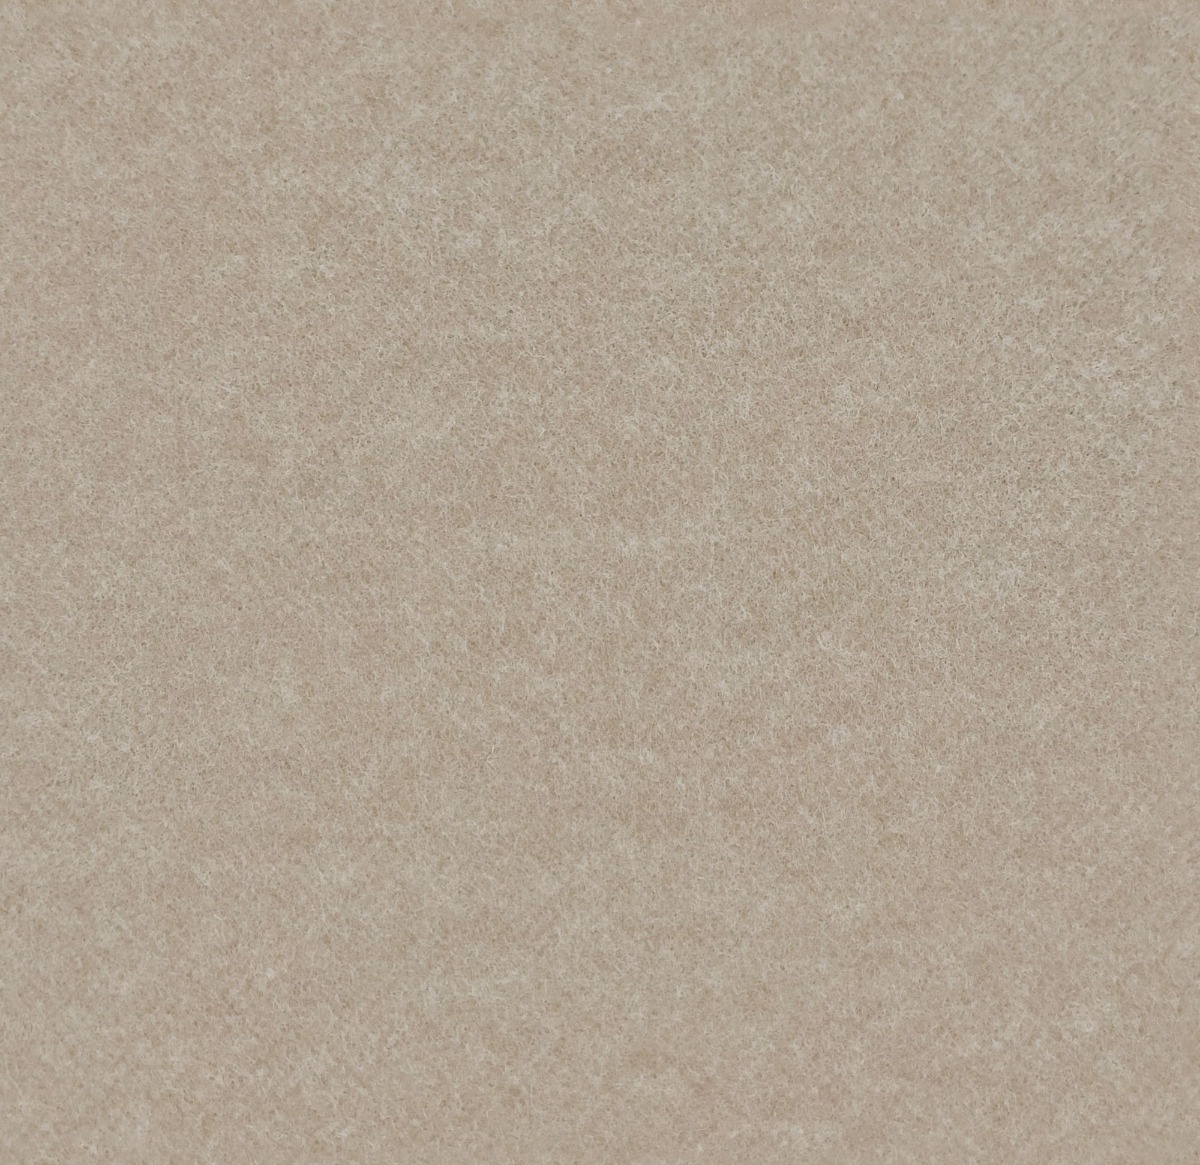 A seamless insulation texture with acoustic tile in parthenon units arranged in a None pattern